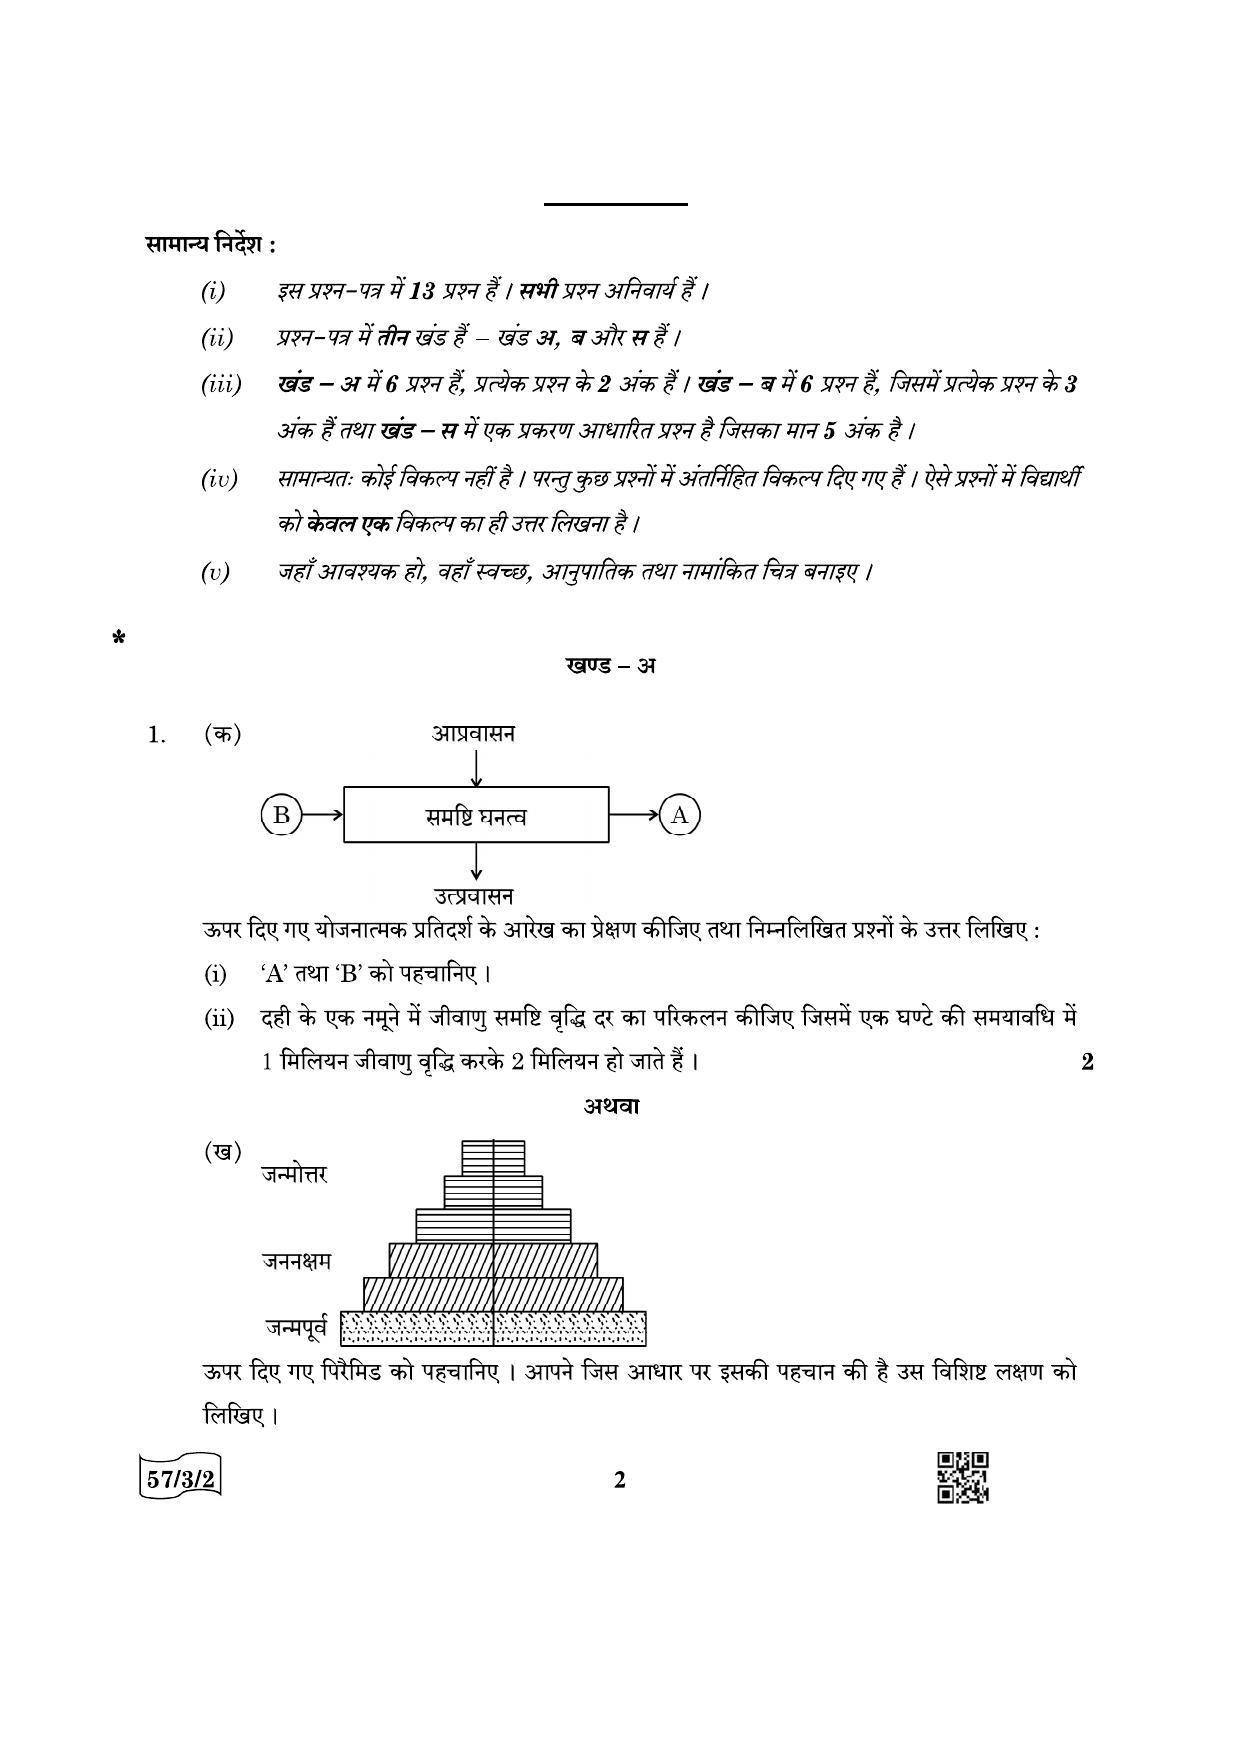 CBSE Class 12 57-3-2 Biology 2022 Question Paper - Page 2